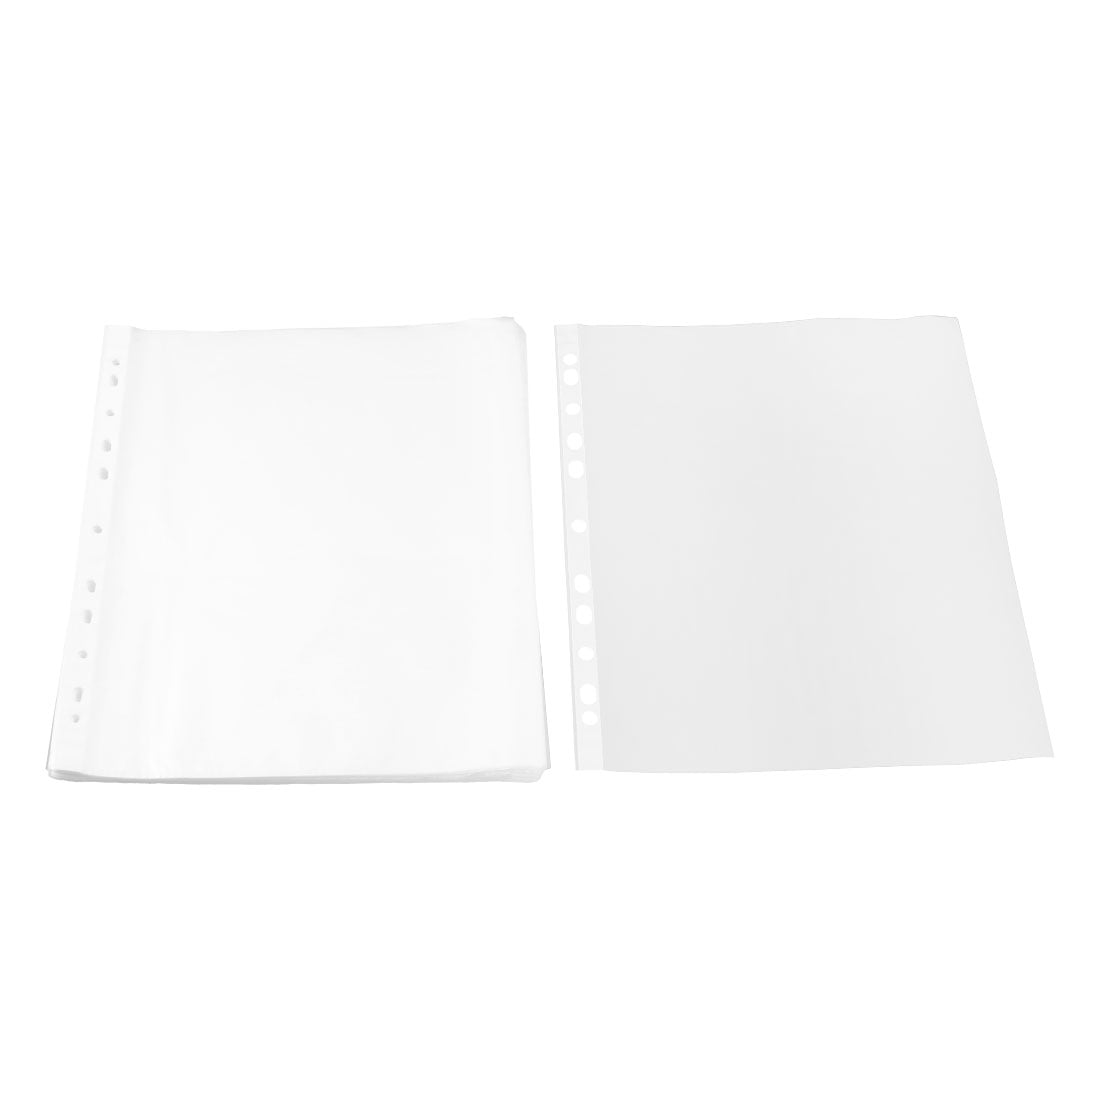 JAM Plastic Sleeves, Letter Size, 9 x 11 1/2, Purple Project Pockets, 120  Bulk Page Protectors/Pack